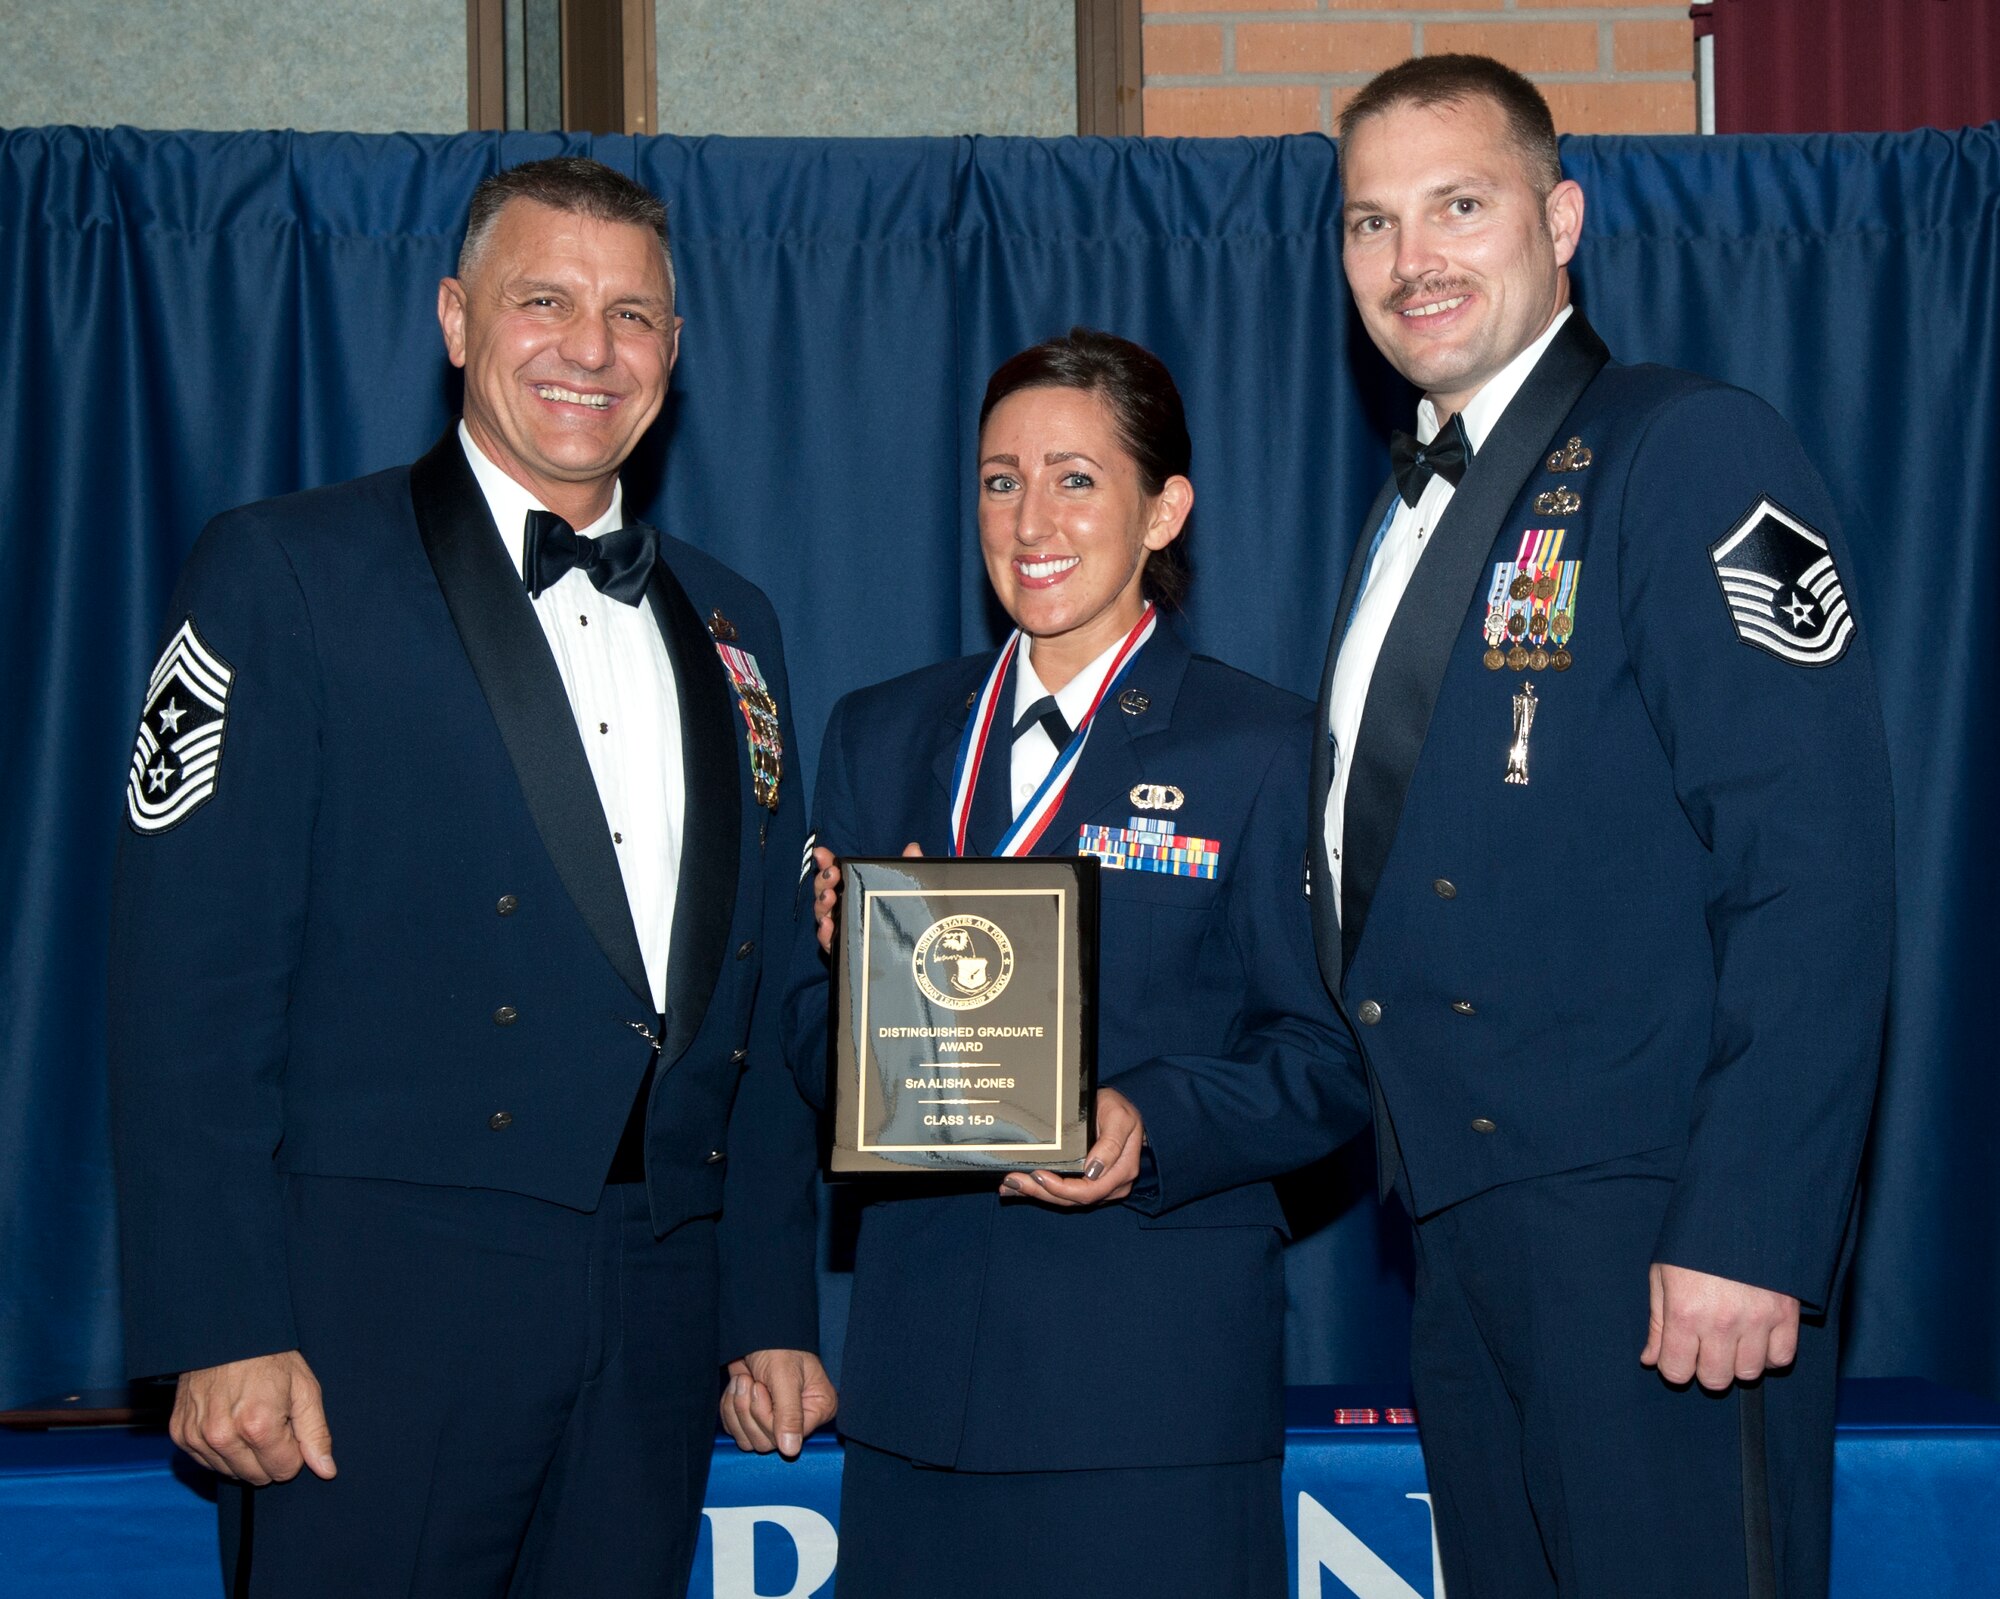 Senior Airman Alisha Jones, from the 71st Operations Support Squadron, is recognized as the Distinguished Graduate by Command Chief Master Sgt. Peter Speen, the 71st Flying Training Wing command chief, and Master Sgt. Jon Dalton, from the 71st OSS, March 25 during the first-ever Airman Leadership School graduation at Vance in the Vance Collocated Club. Dalton was representing the Silver Talon Top 3 who sponsored the award. (U.S. Air Force photo\ 2nd Lt. Isabel Crump)